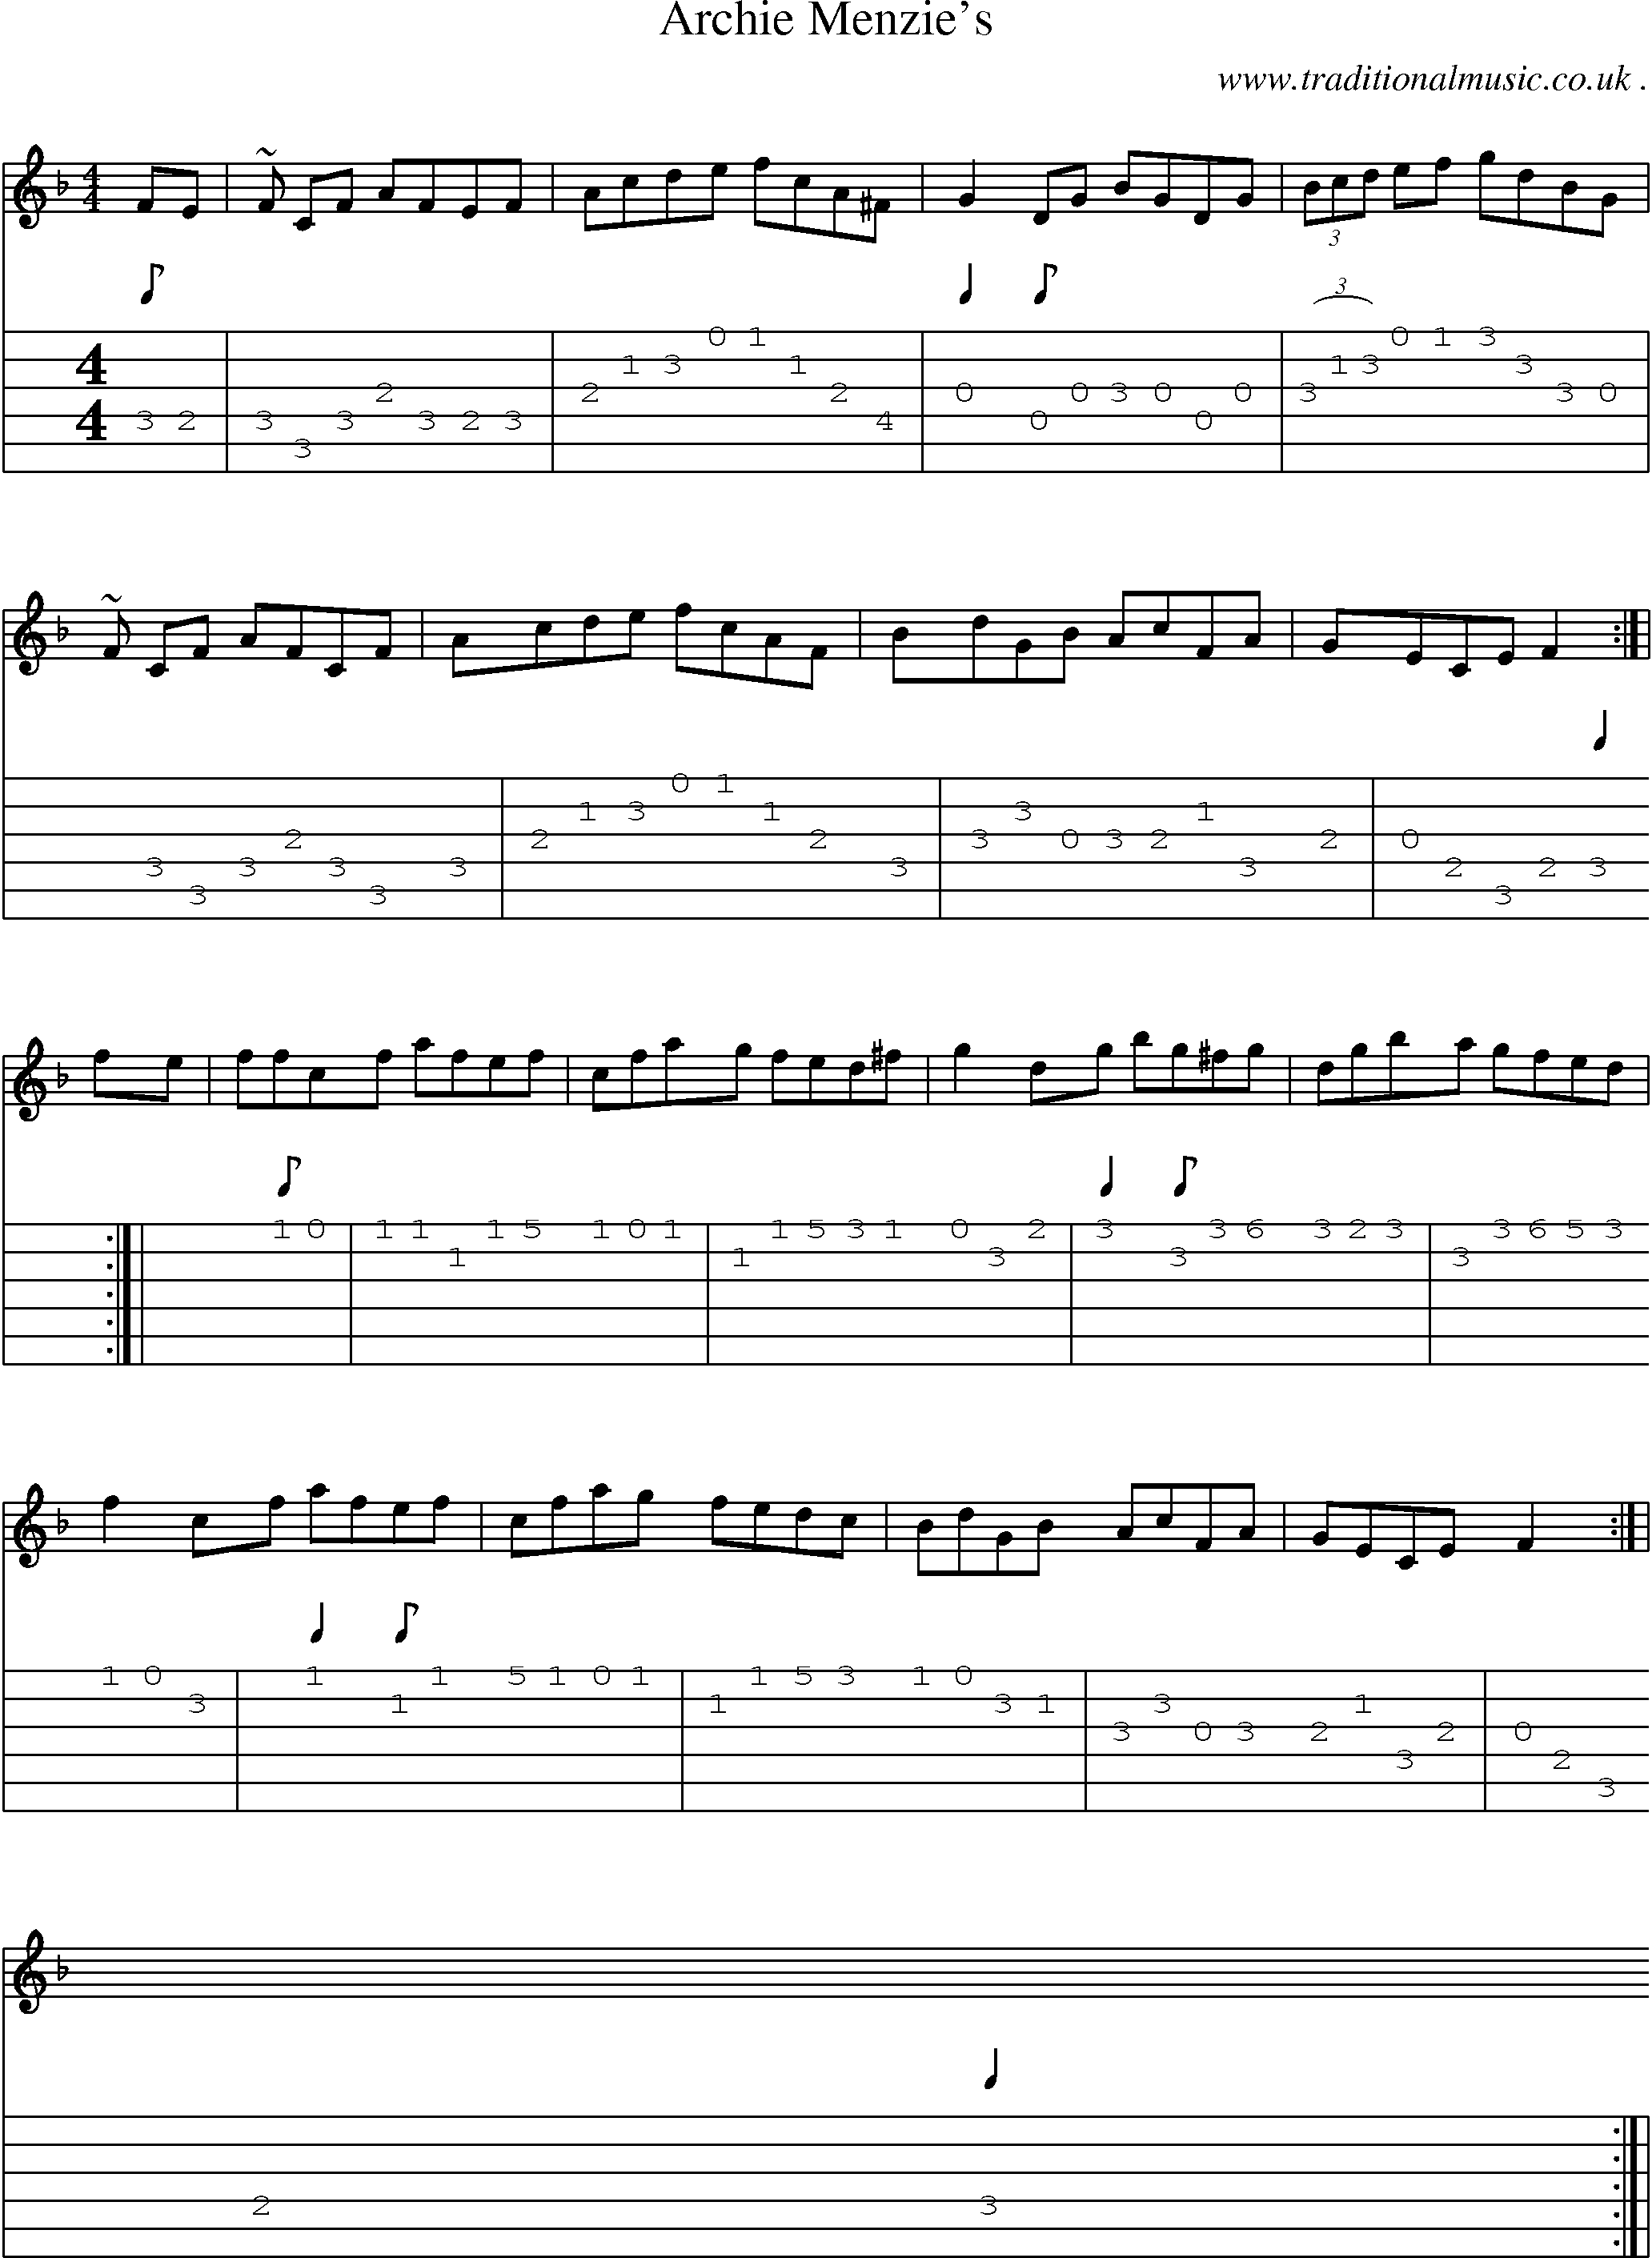 Sheet-music  score, Chords and Guitar Tabs for Archie Menzies1